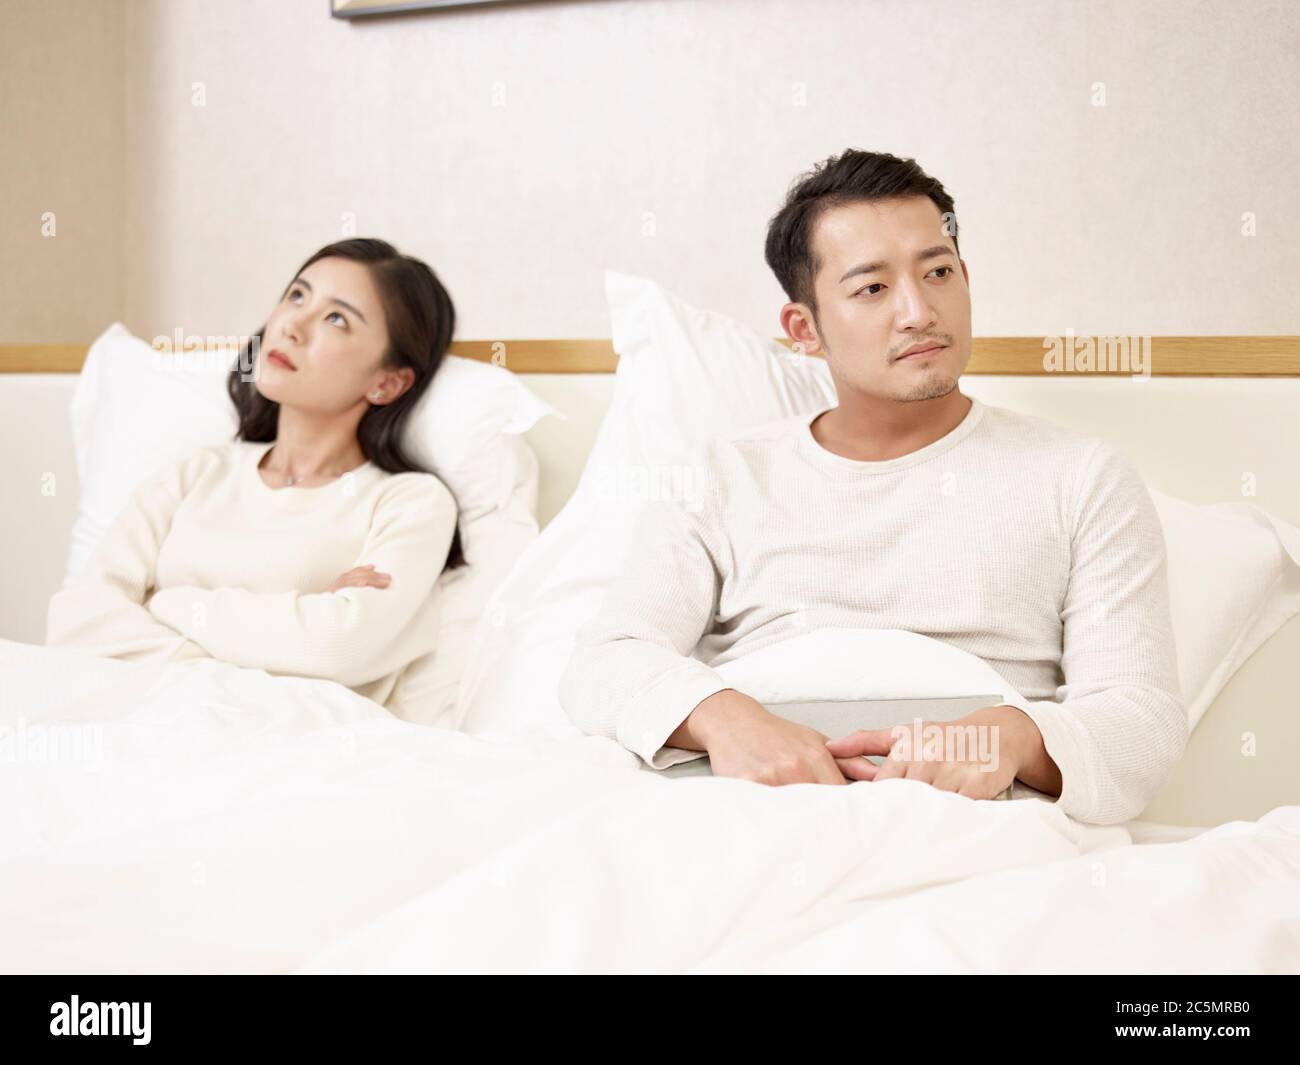 young asian couple unhappy and angry with each other after an argument or fight Stock Photo